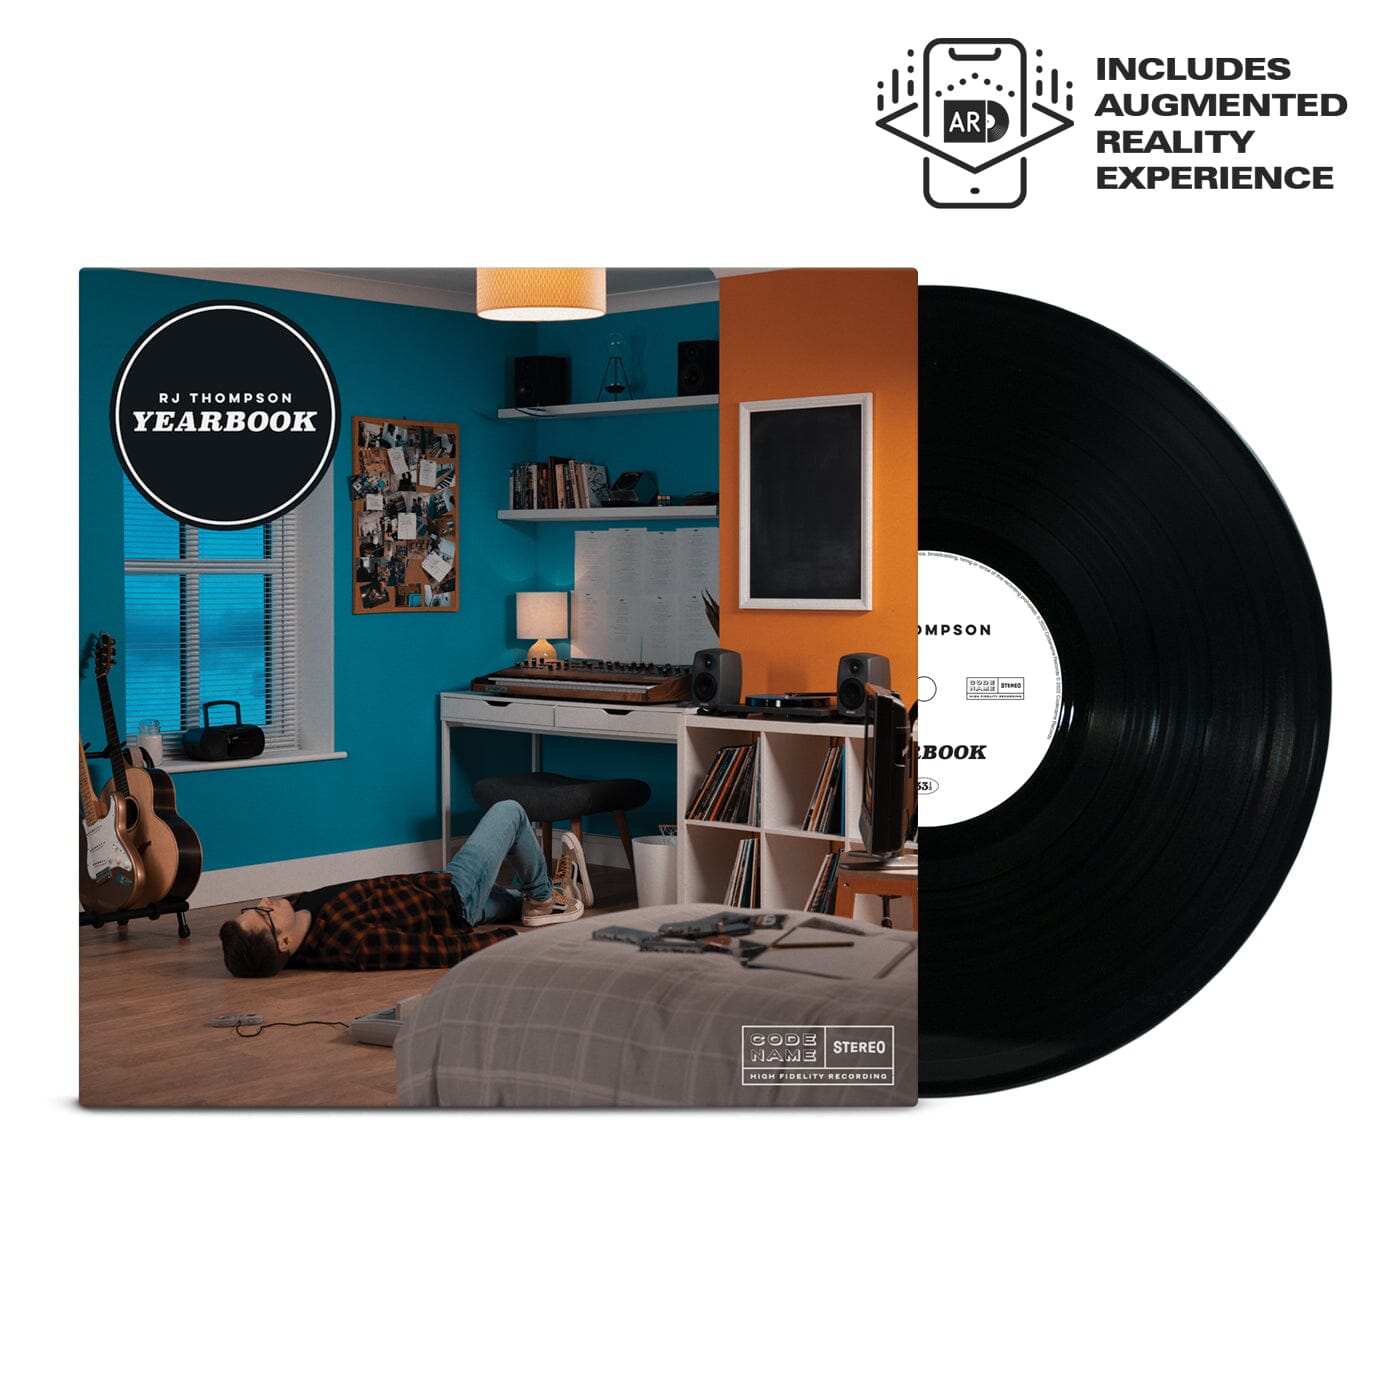 Yearbook - Limited Edition 12" Vinyl | RJ Thompson | Official Website & Store